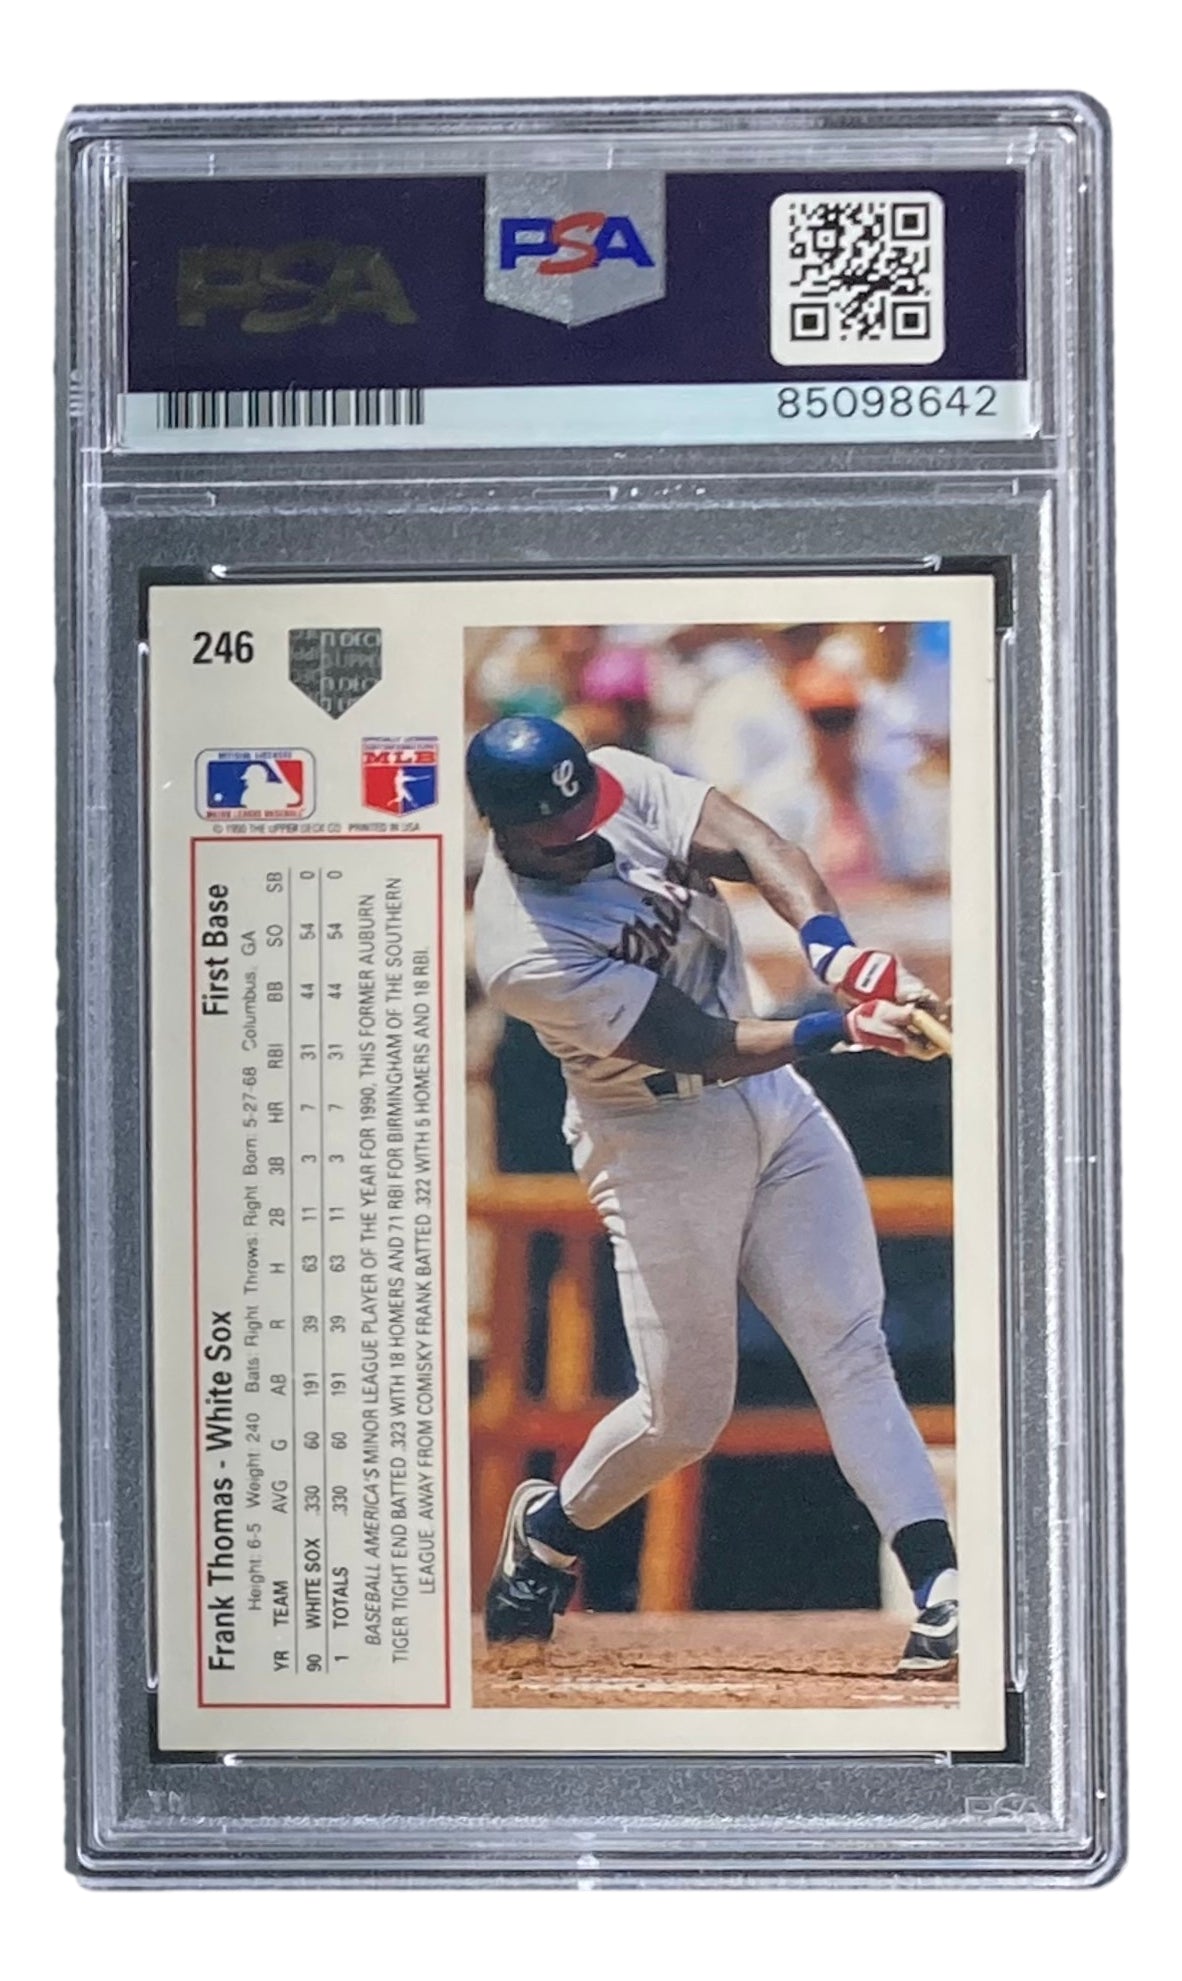 Frank Thomas Signed 1991 Upper Deck #246 Chicago White Sox Rookie Card PSA/DNA